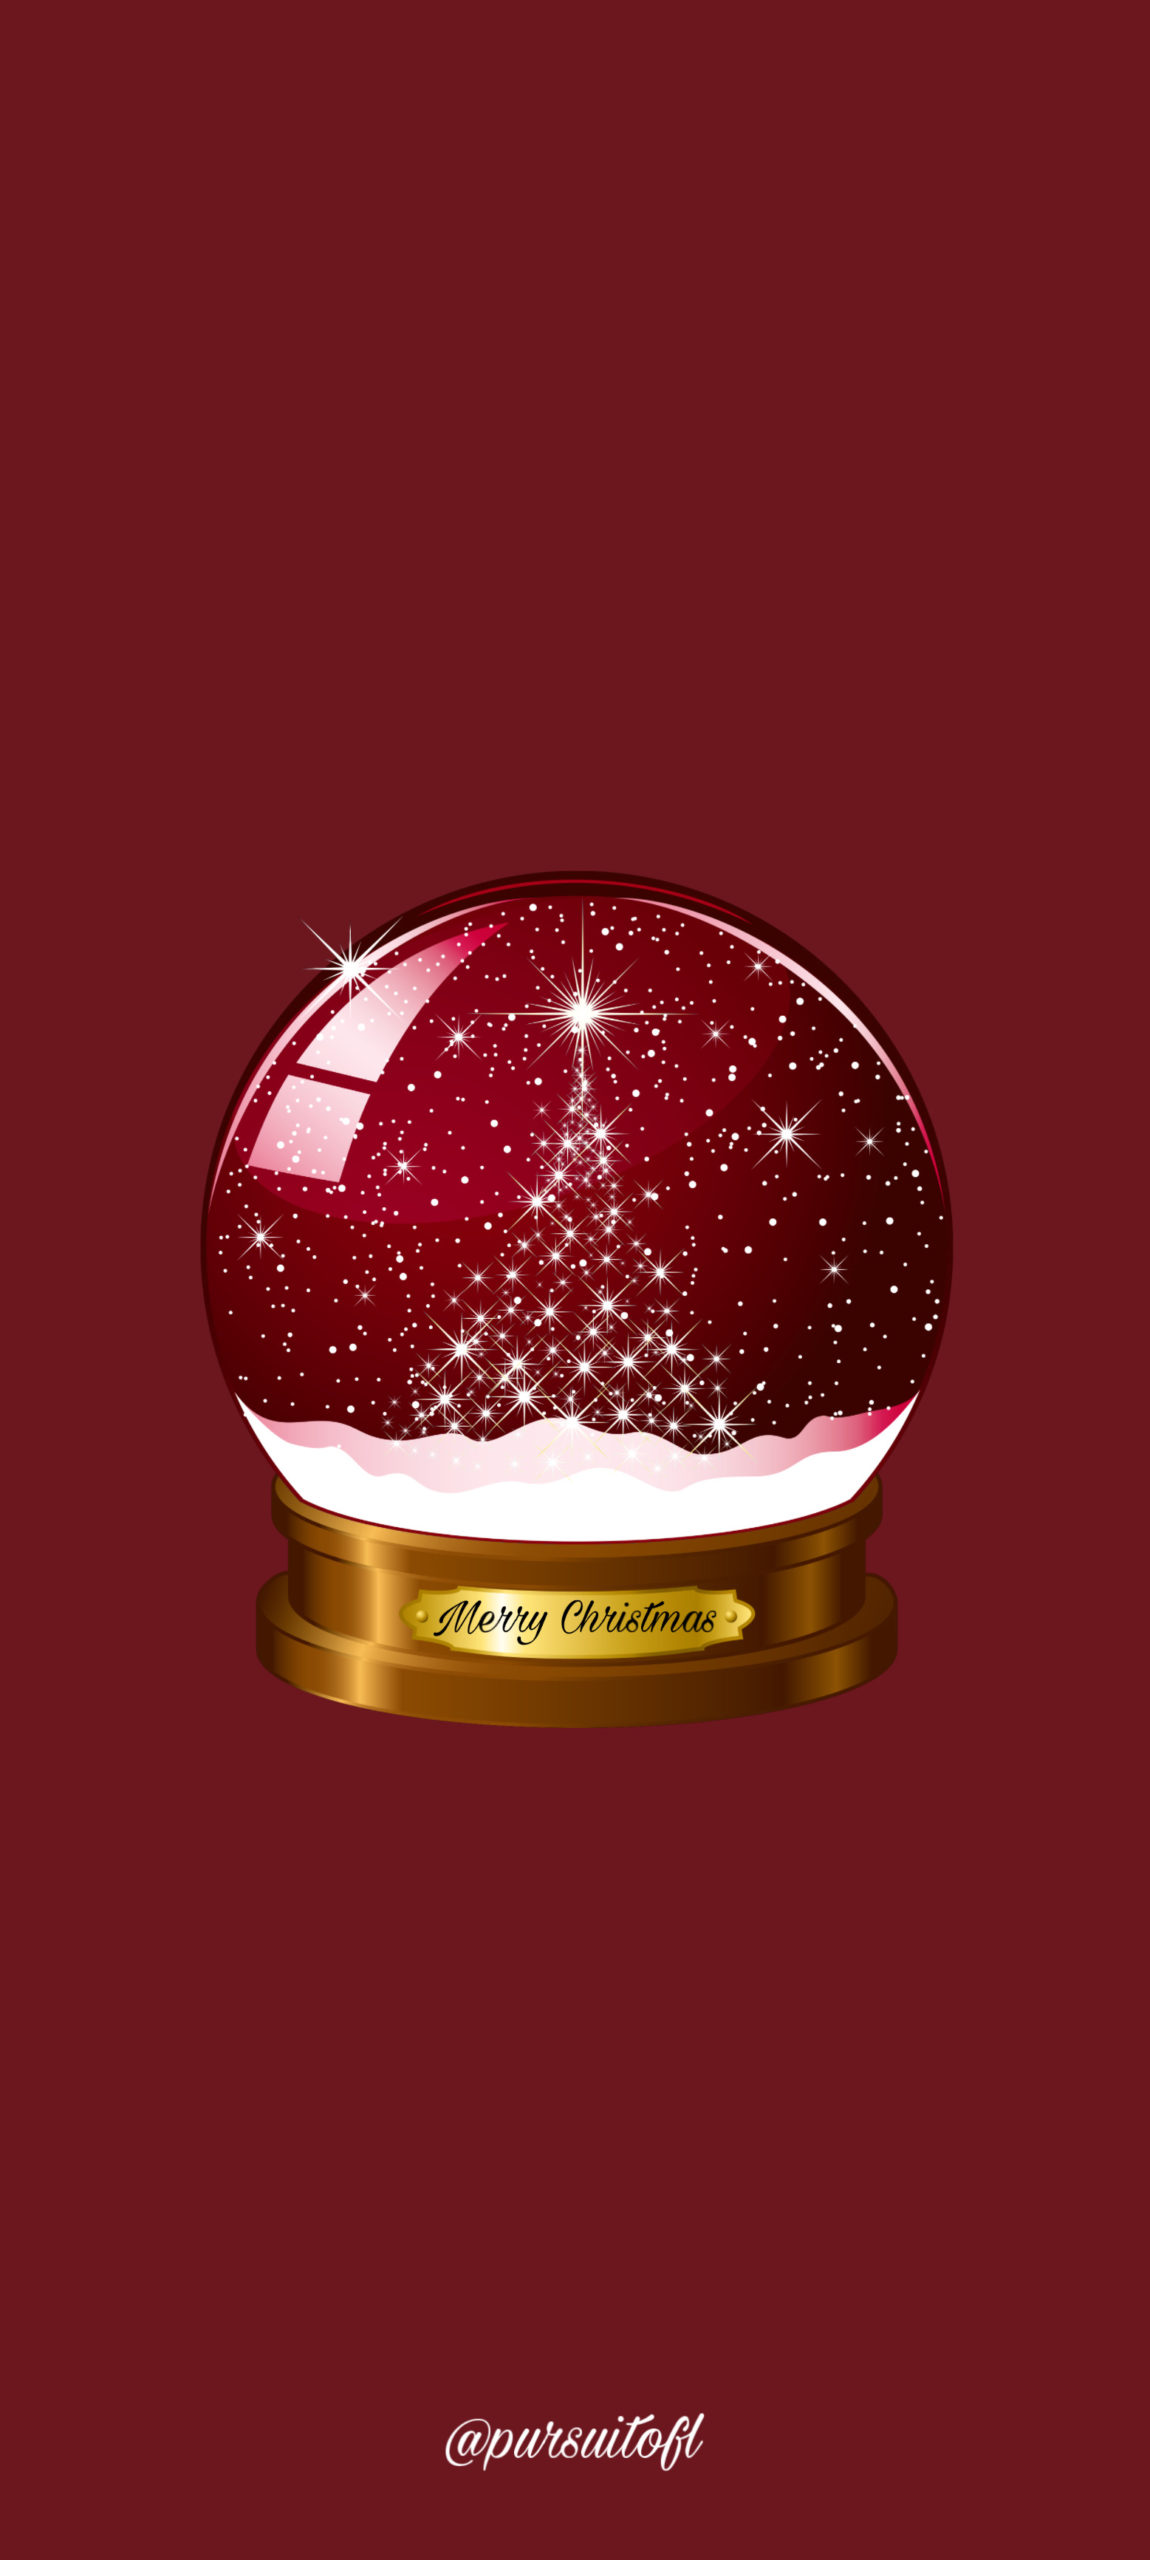 Red Holiday Phone Wallpaper with Christmas Tree Snow Globe and Merry Christmas label